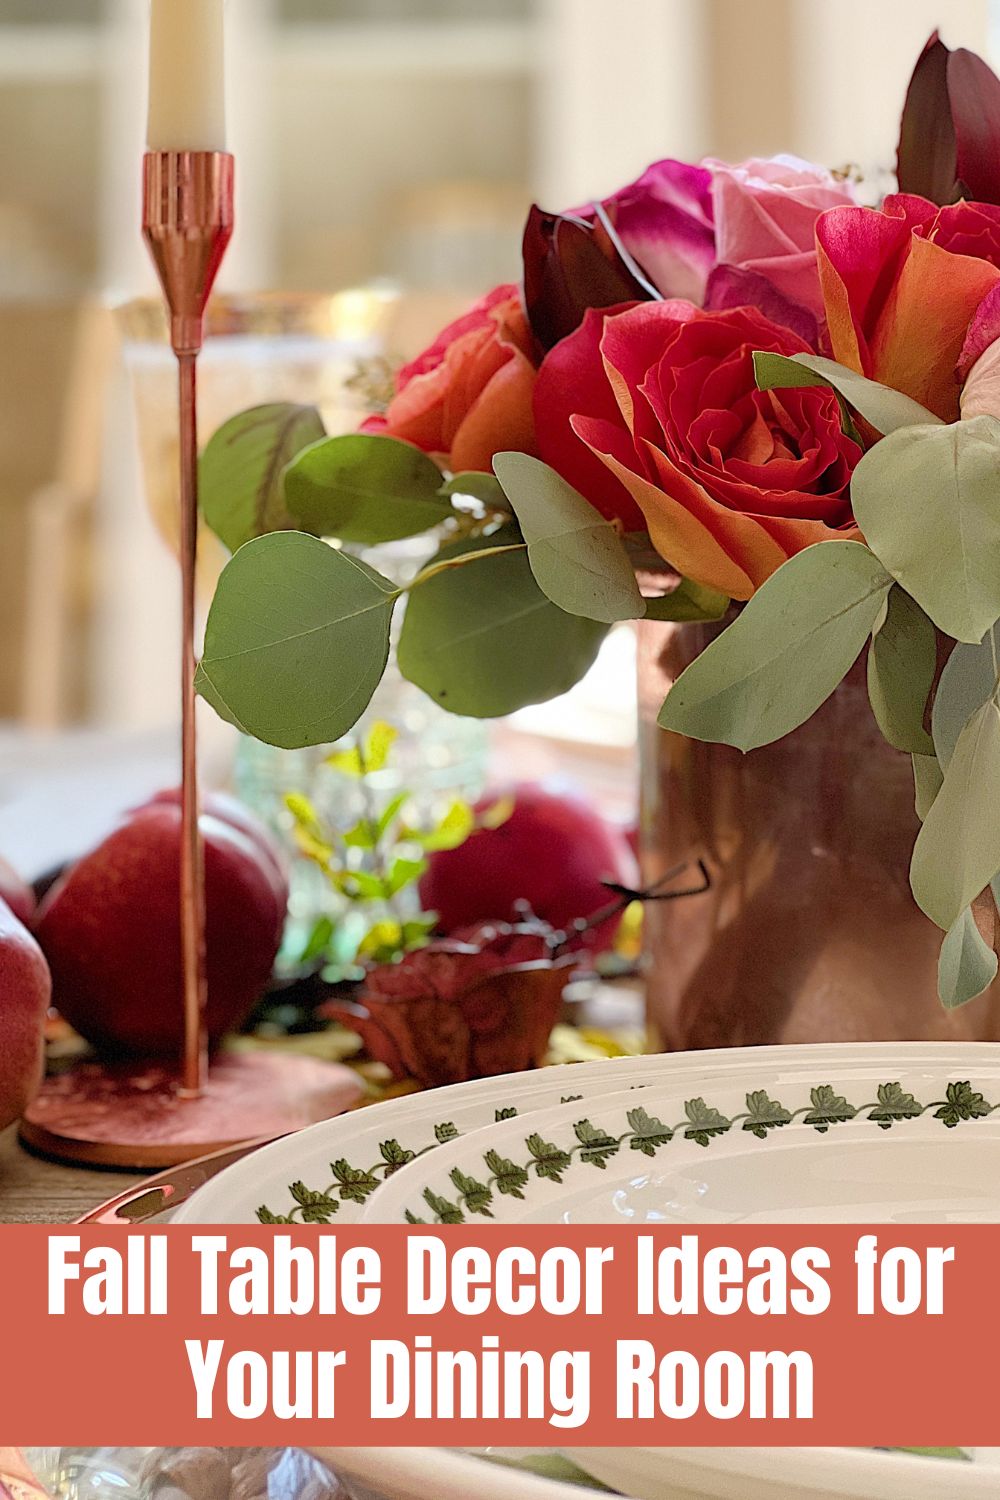 I just transformed our dining room from summer to fall. I can't wait to share the fresh and faux fall table decor items I used!